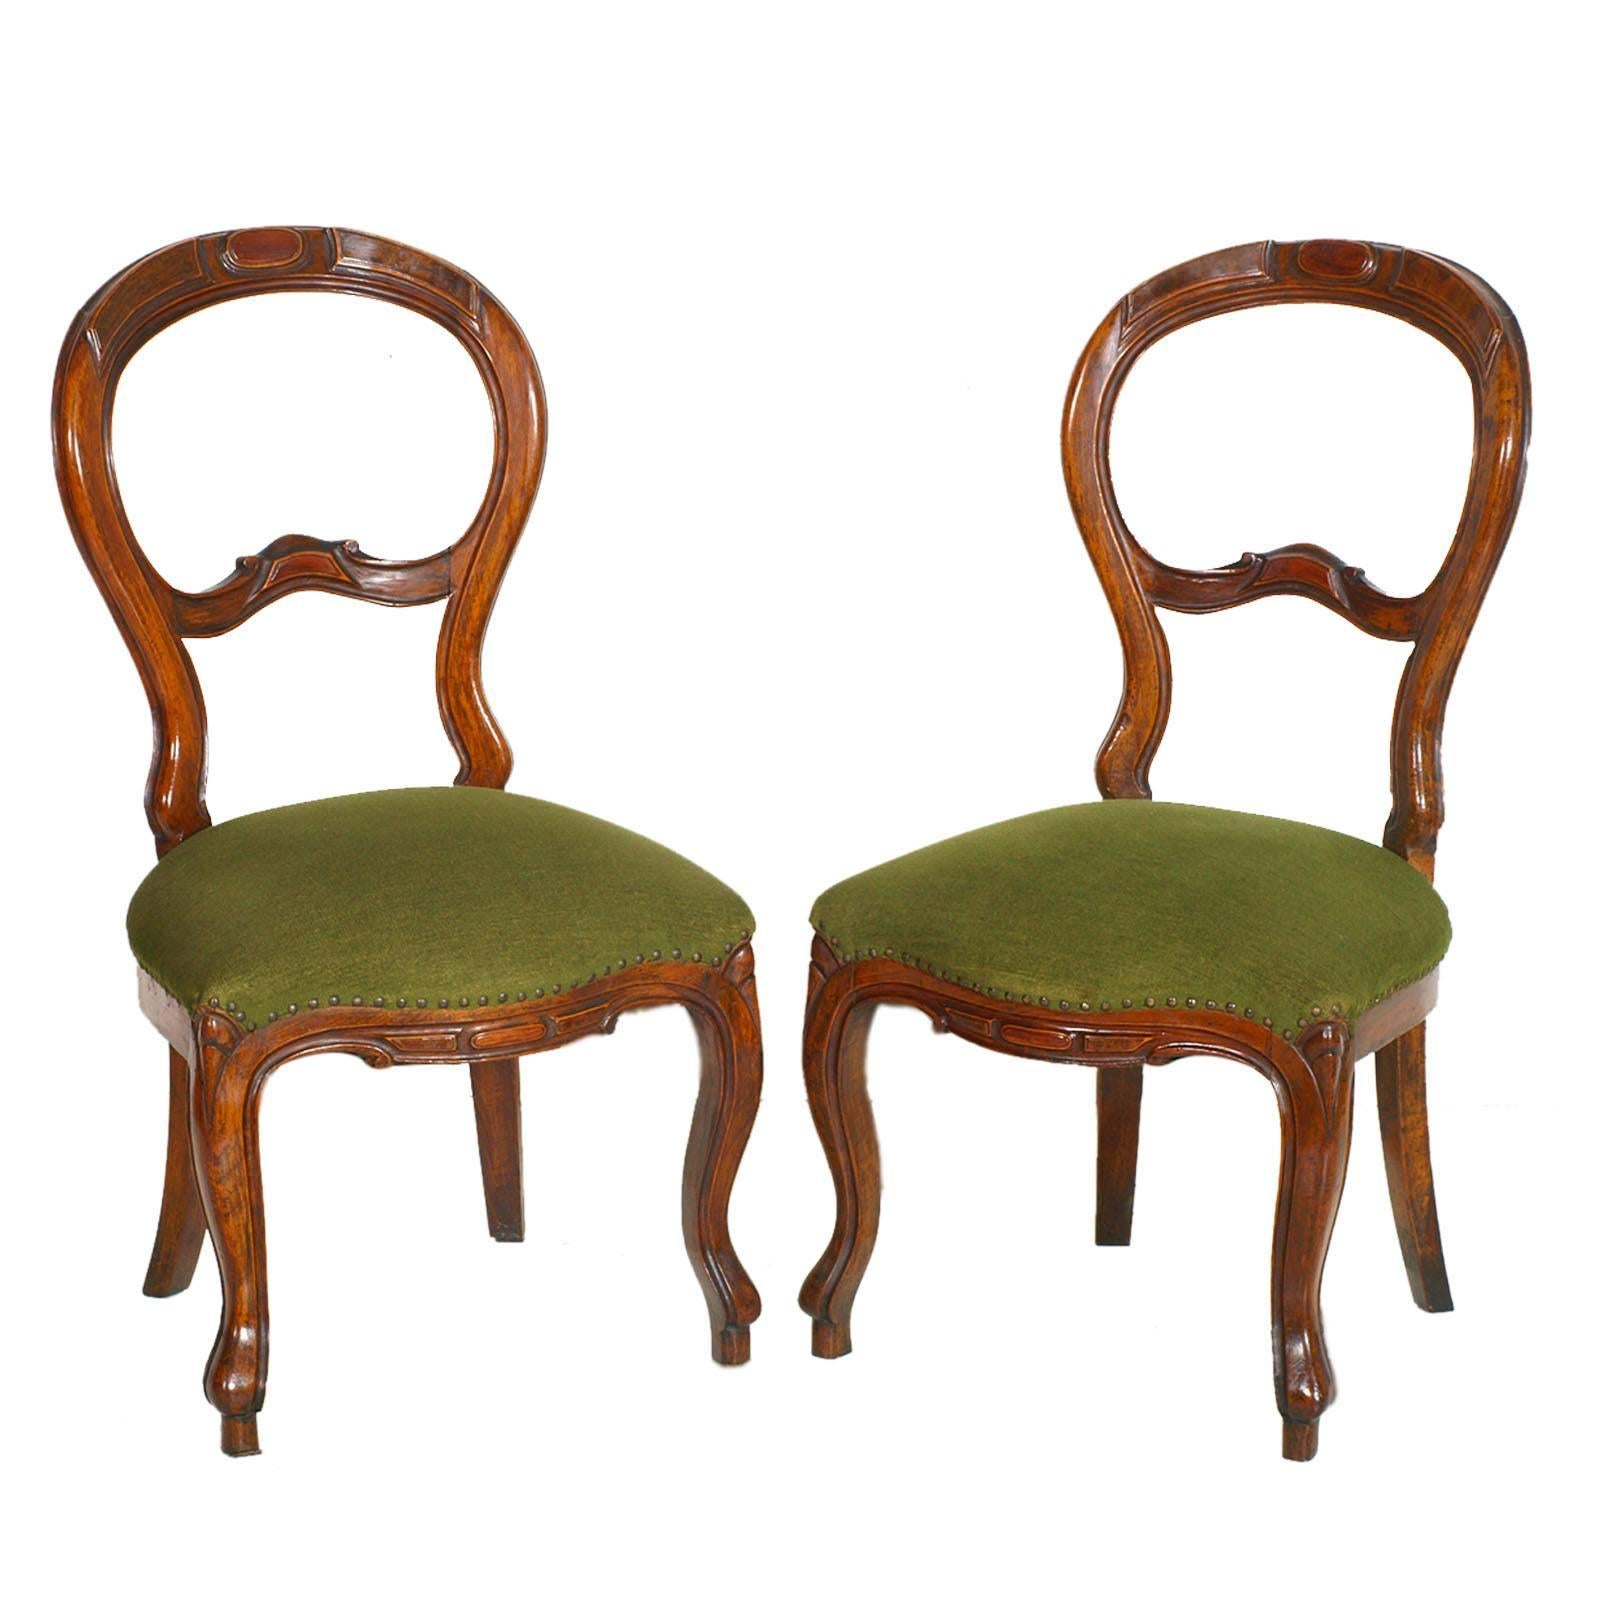 Pair of 19th Century Baroque Side Chairs, Hand-Carved Walnut, Velvet Upholstery